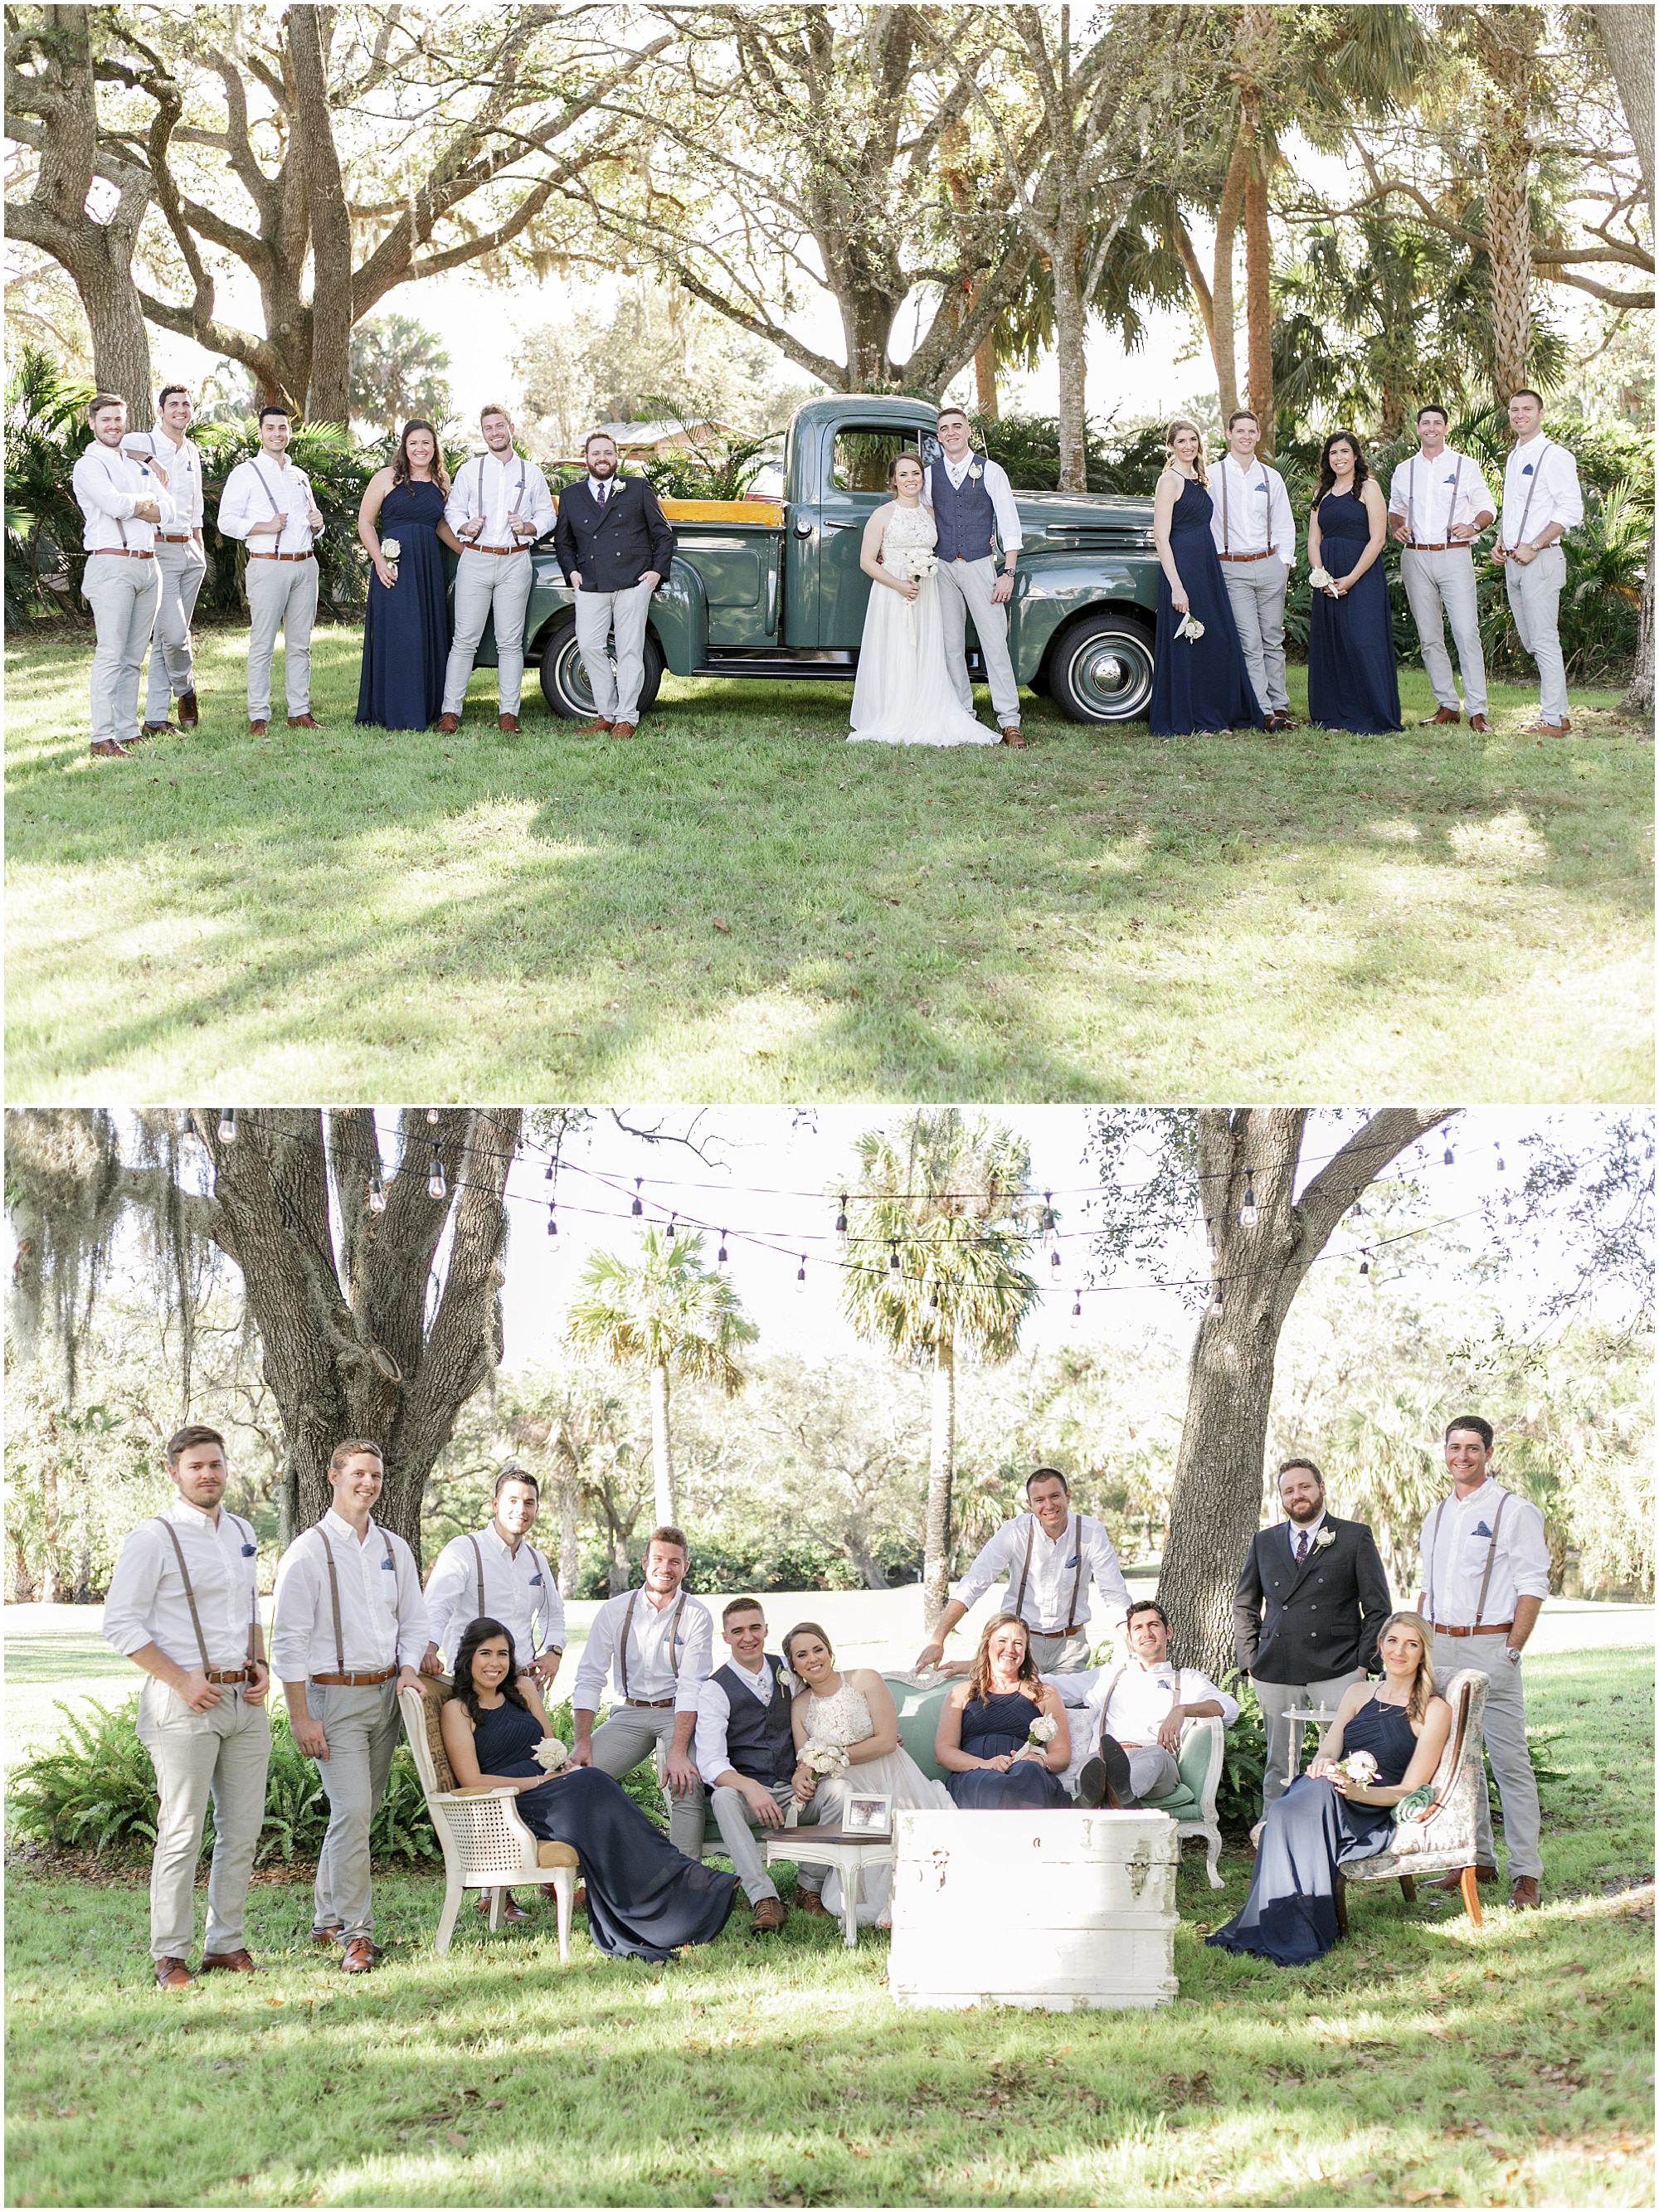 The entire wedding party posing around a vintage truck